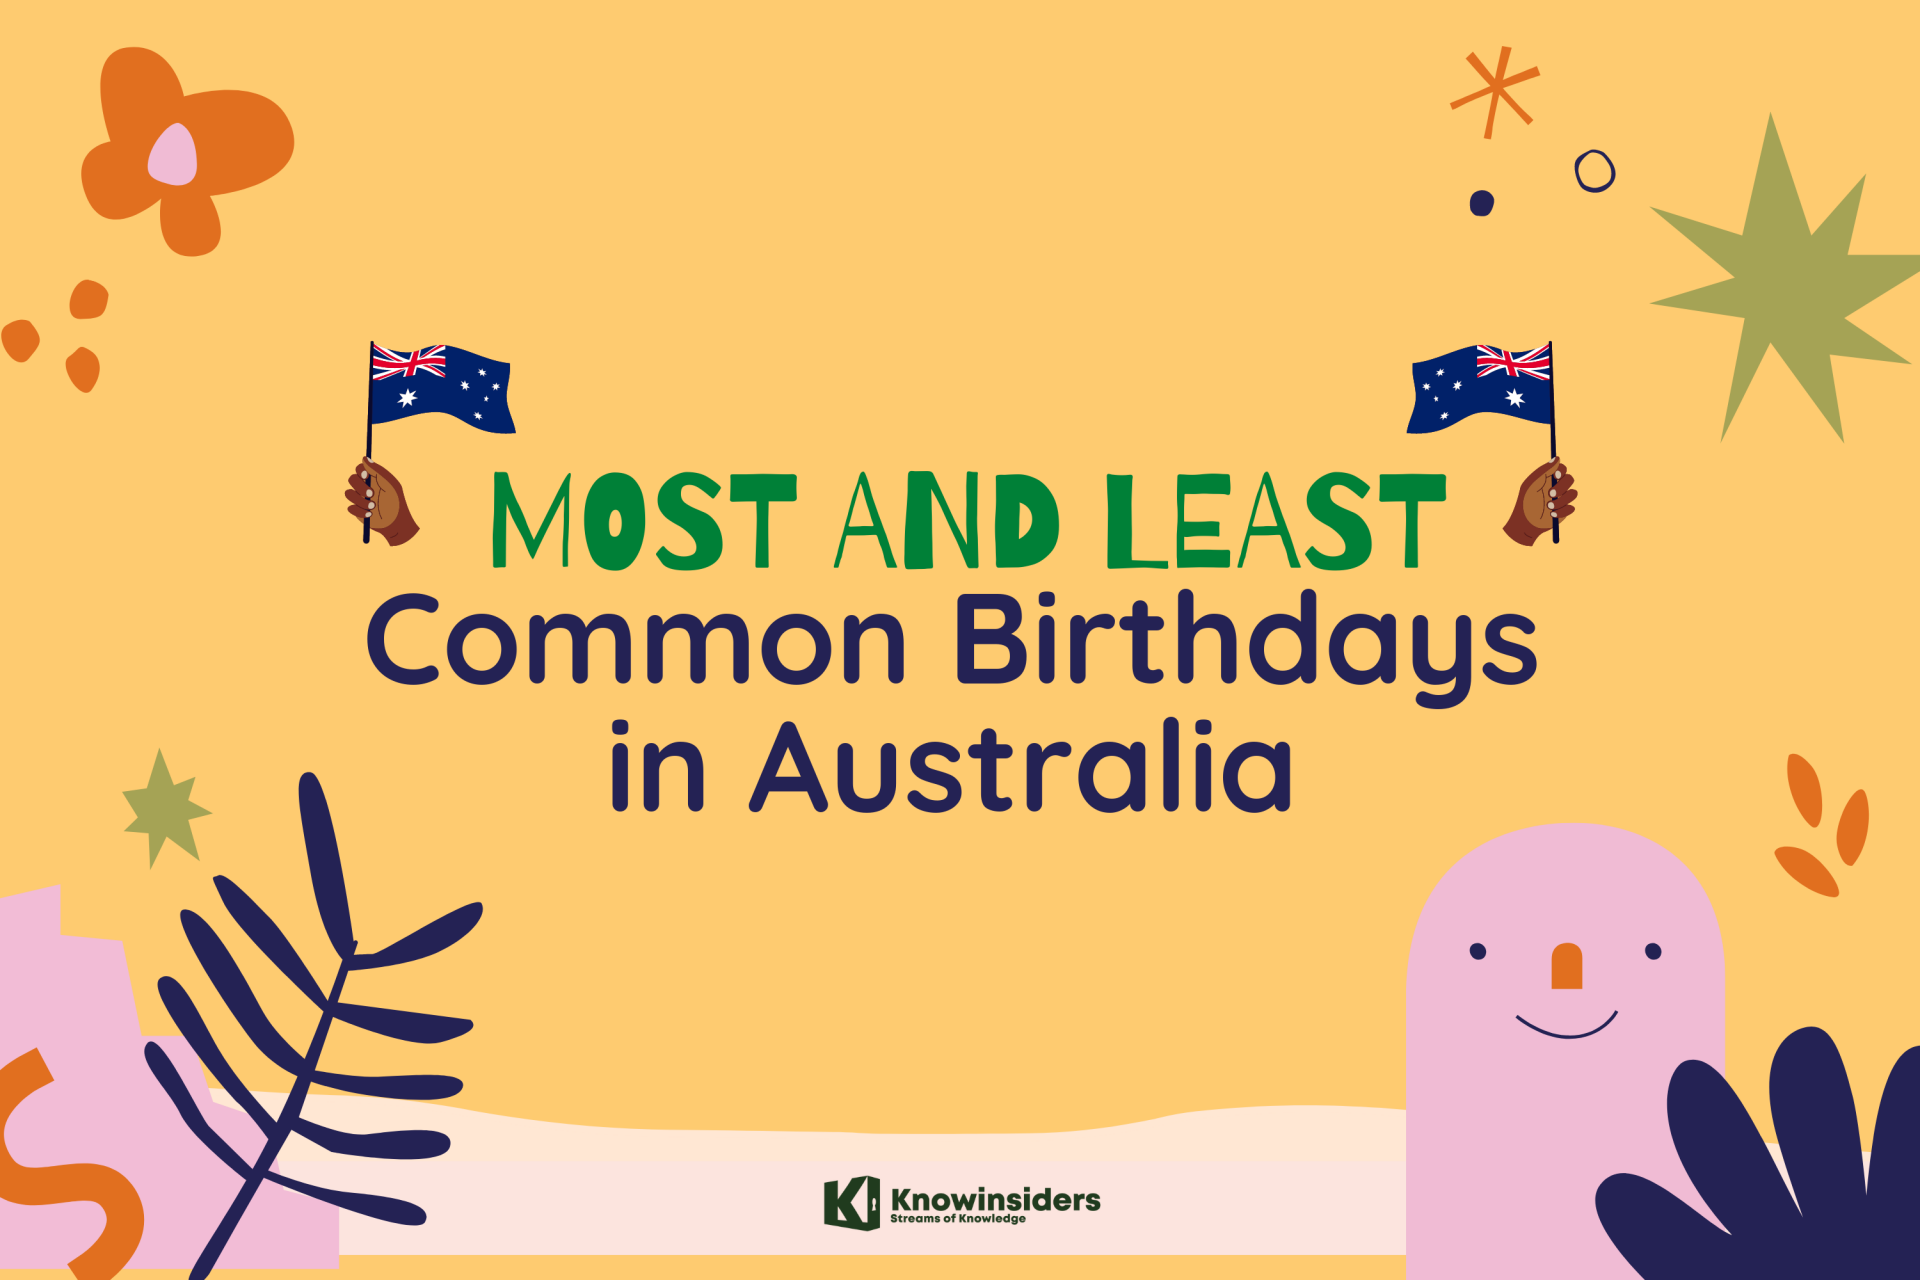 What are the Most and Least Common Birthdays in Australia?